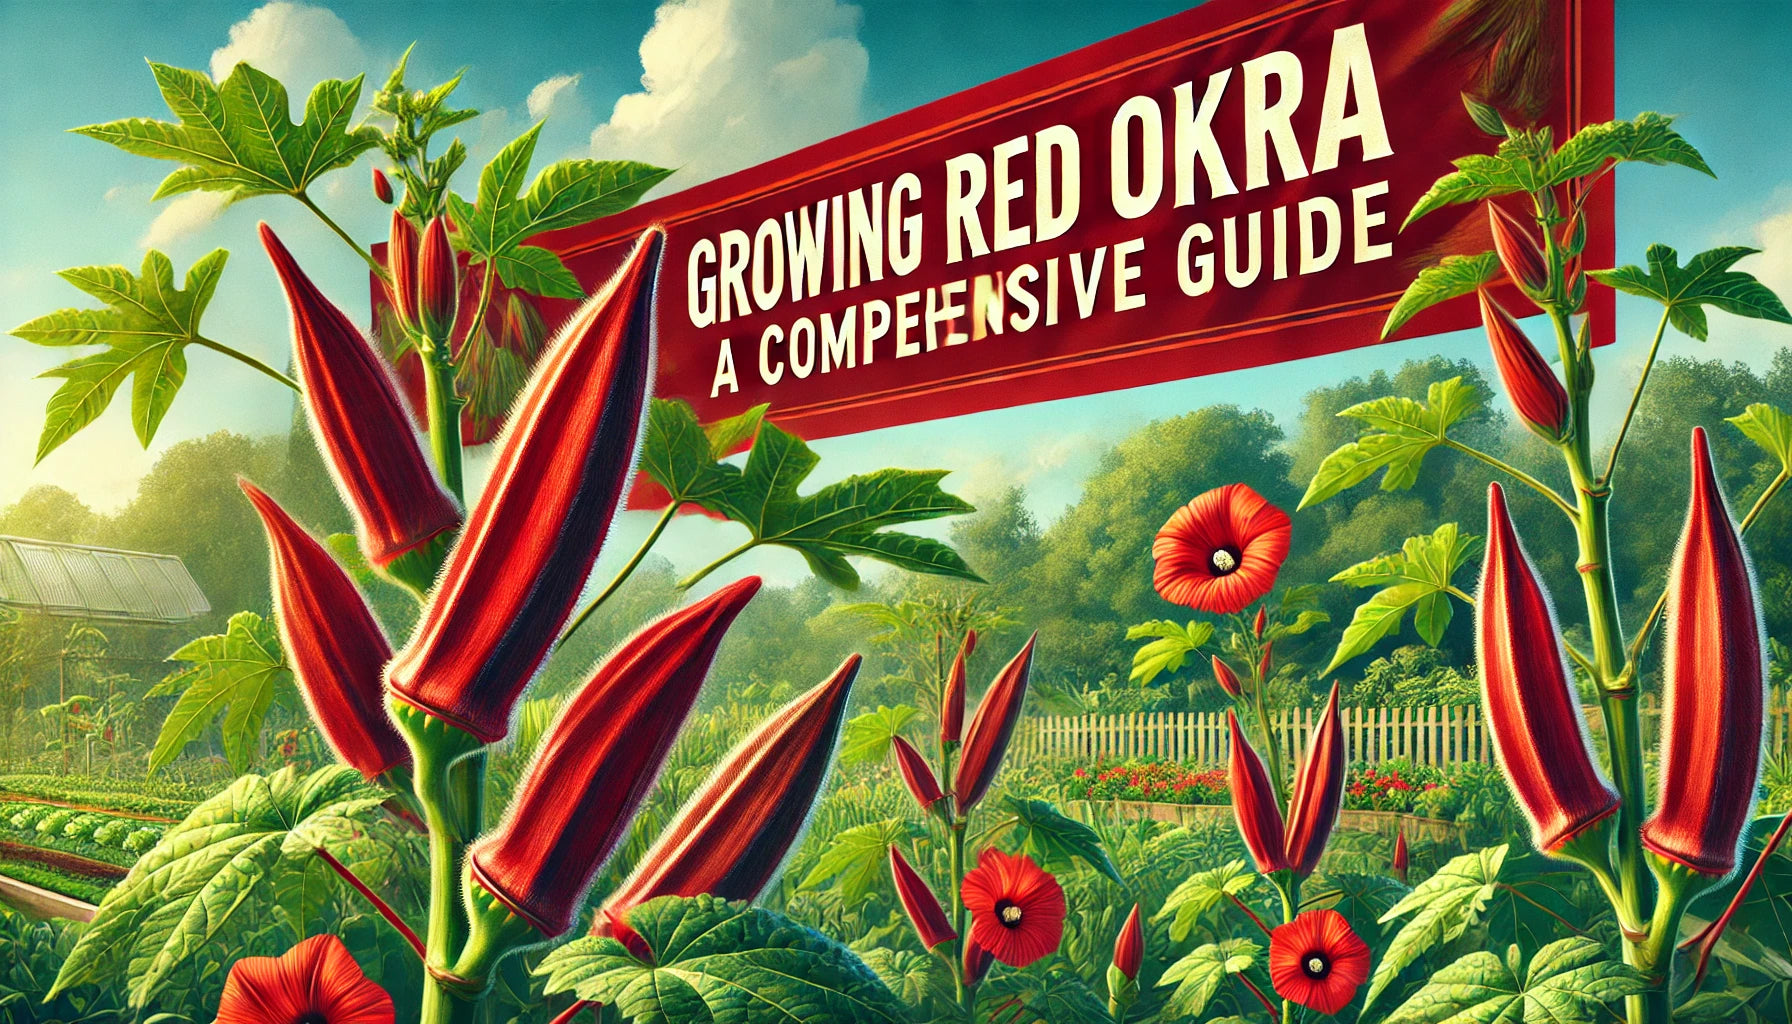 Growing Red Okra: A Comprehensive Guide and Its Health Benefits